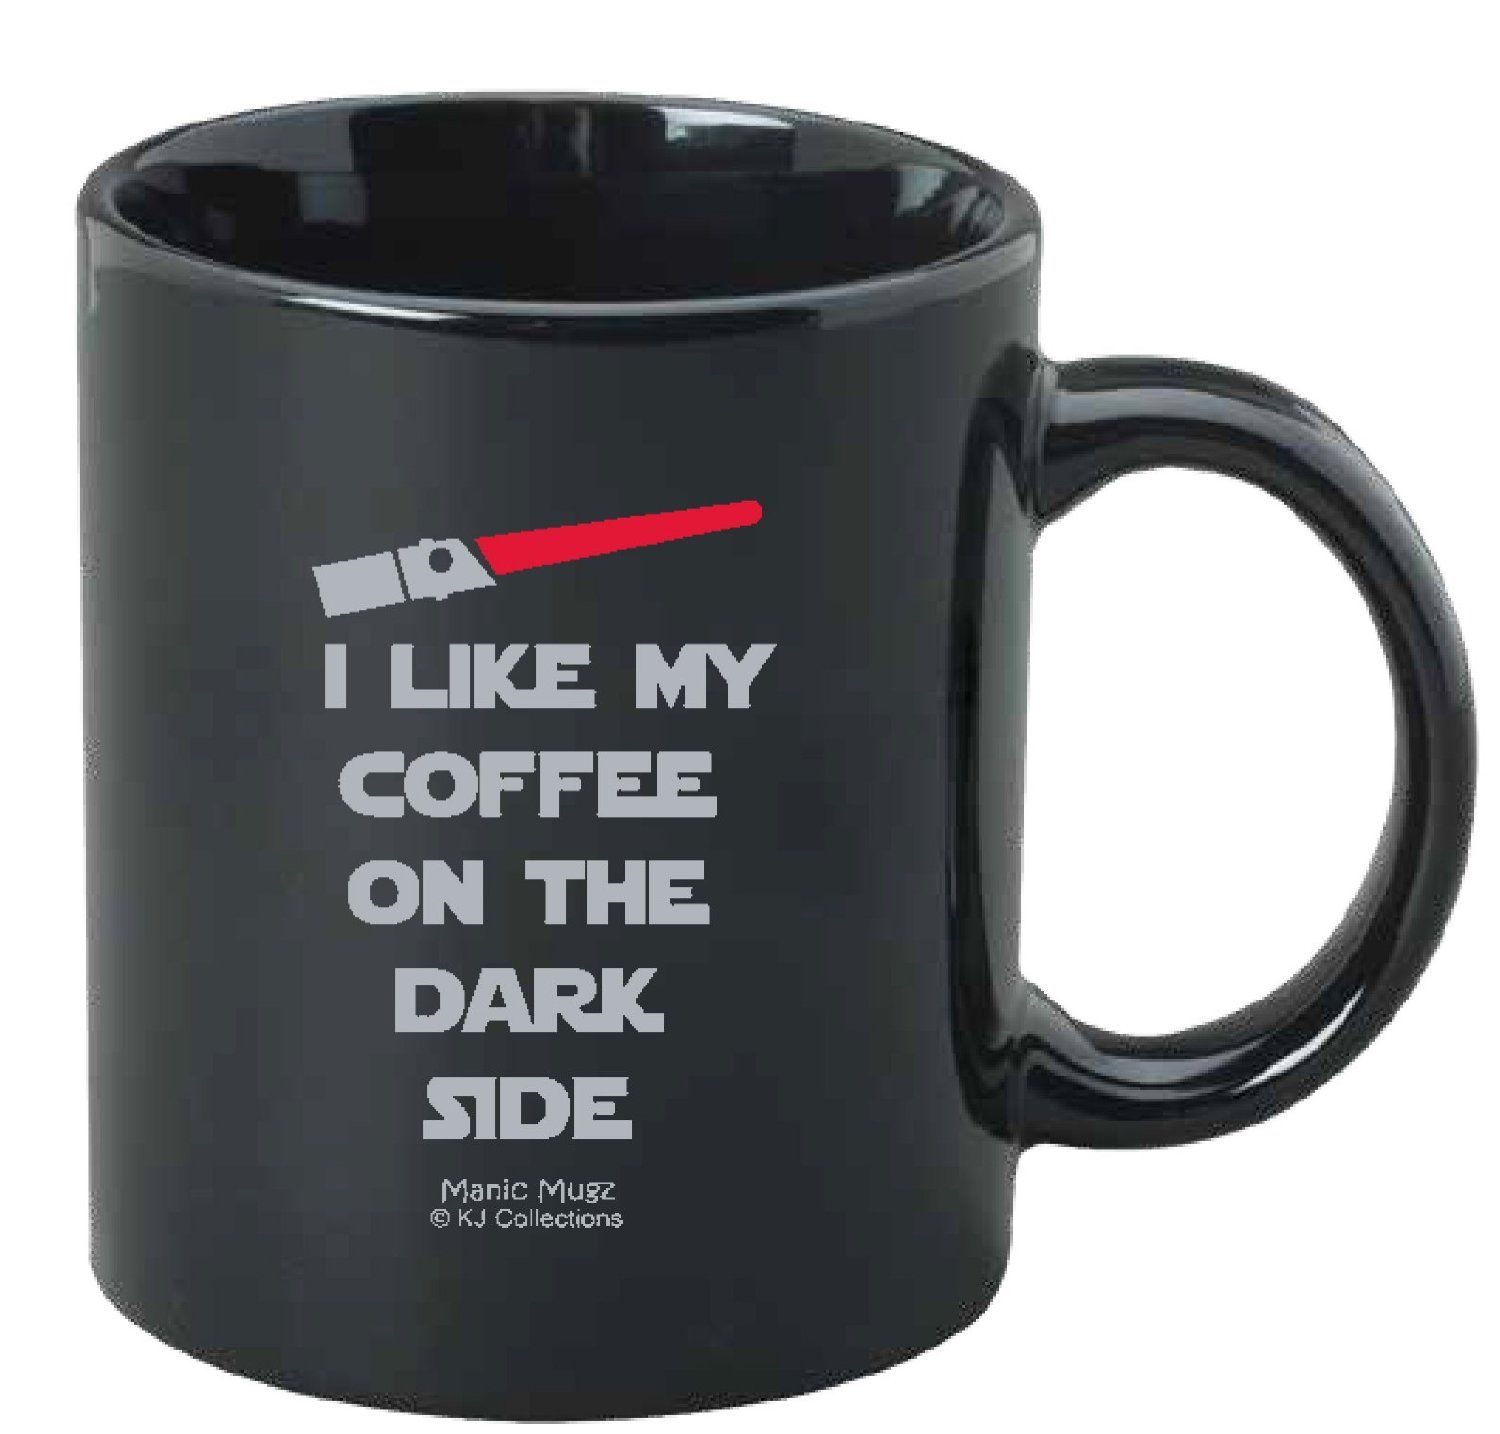 Star Wars Inspired I Like My Coffee on the Dark Side Funny Ceramic Mug - Star Wars Inspired I Like My Coffee on the Dark Side Funny Ceramic Mug -   Star Wars Household Items